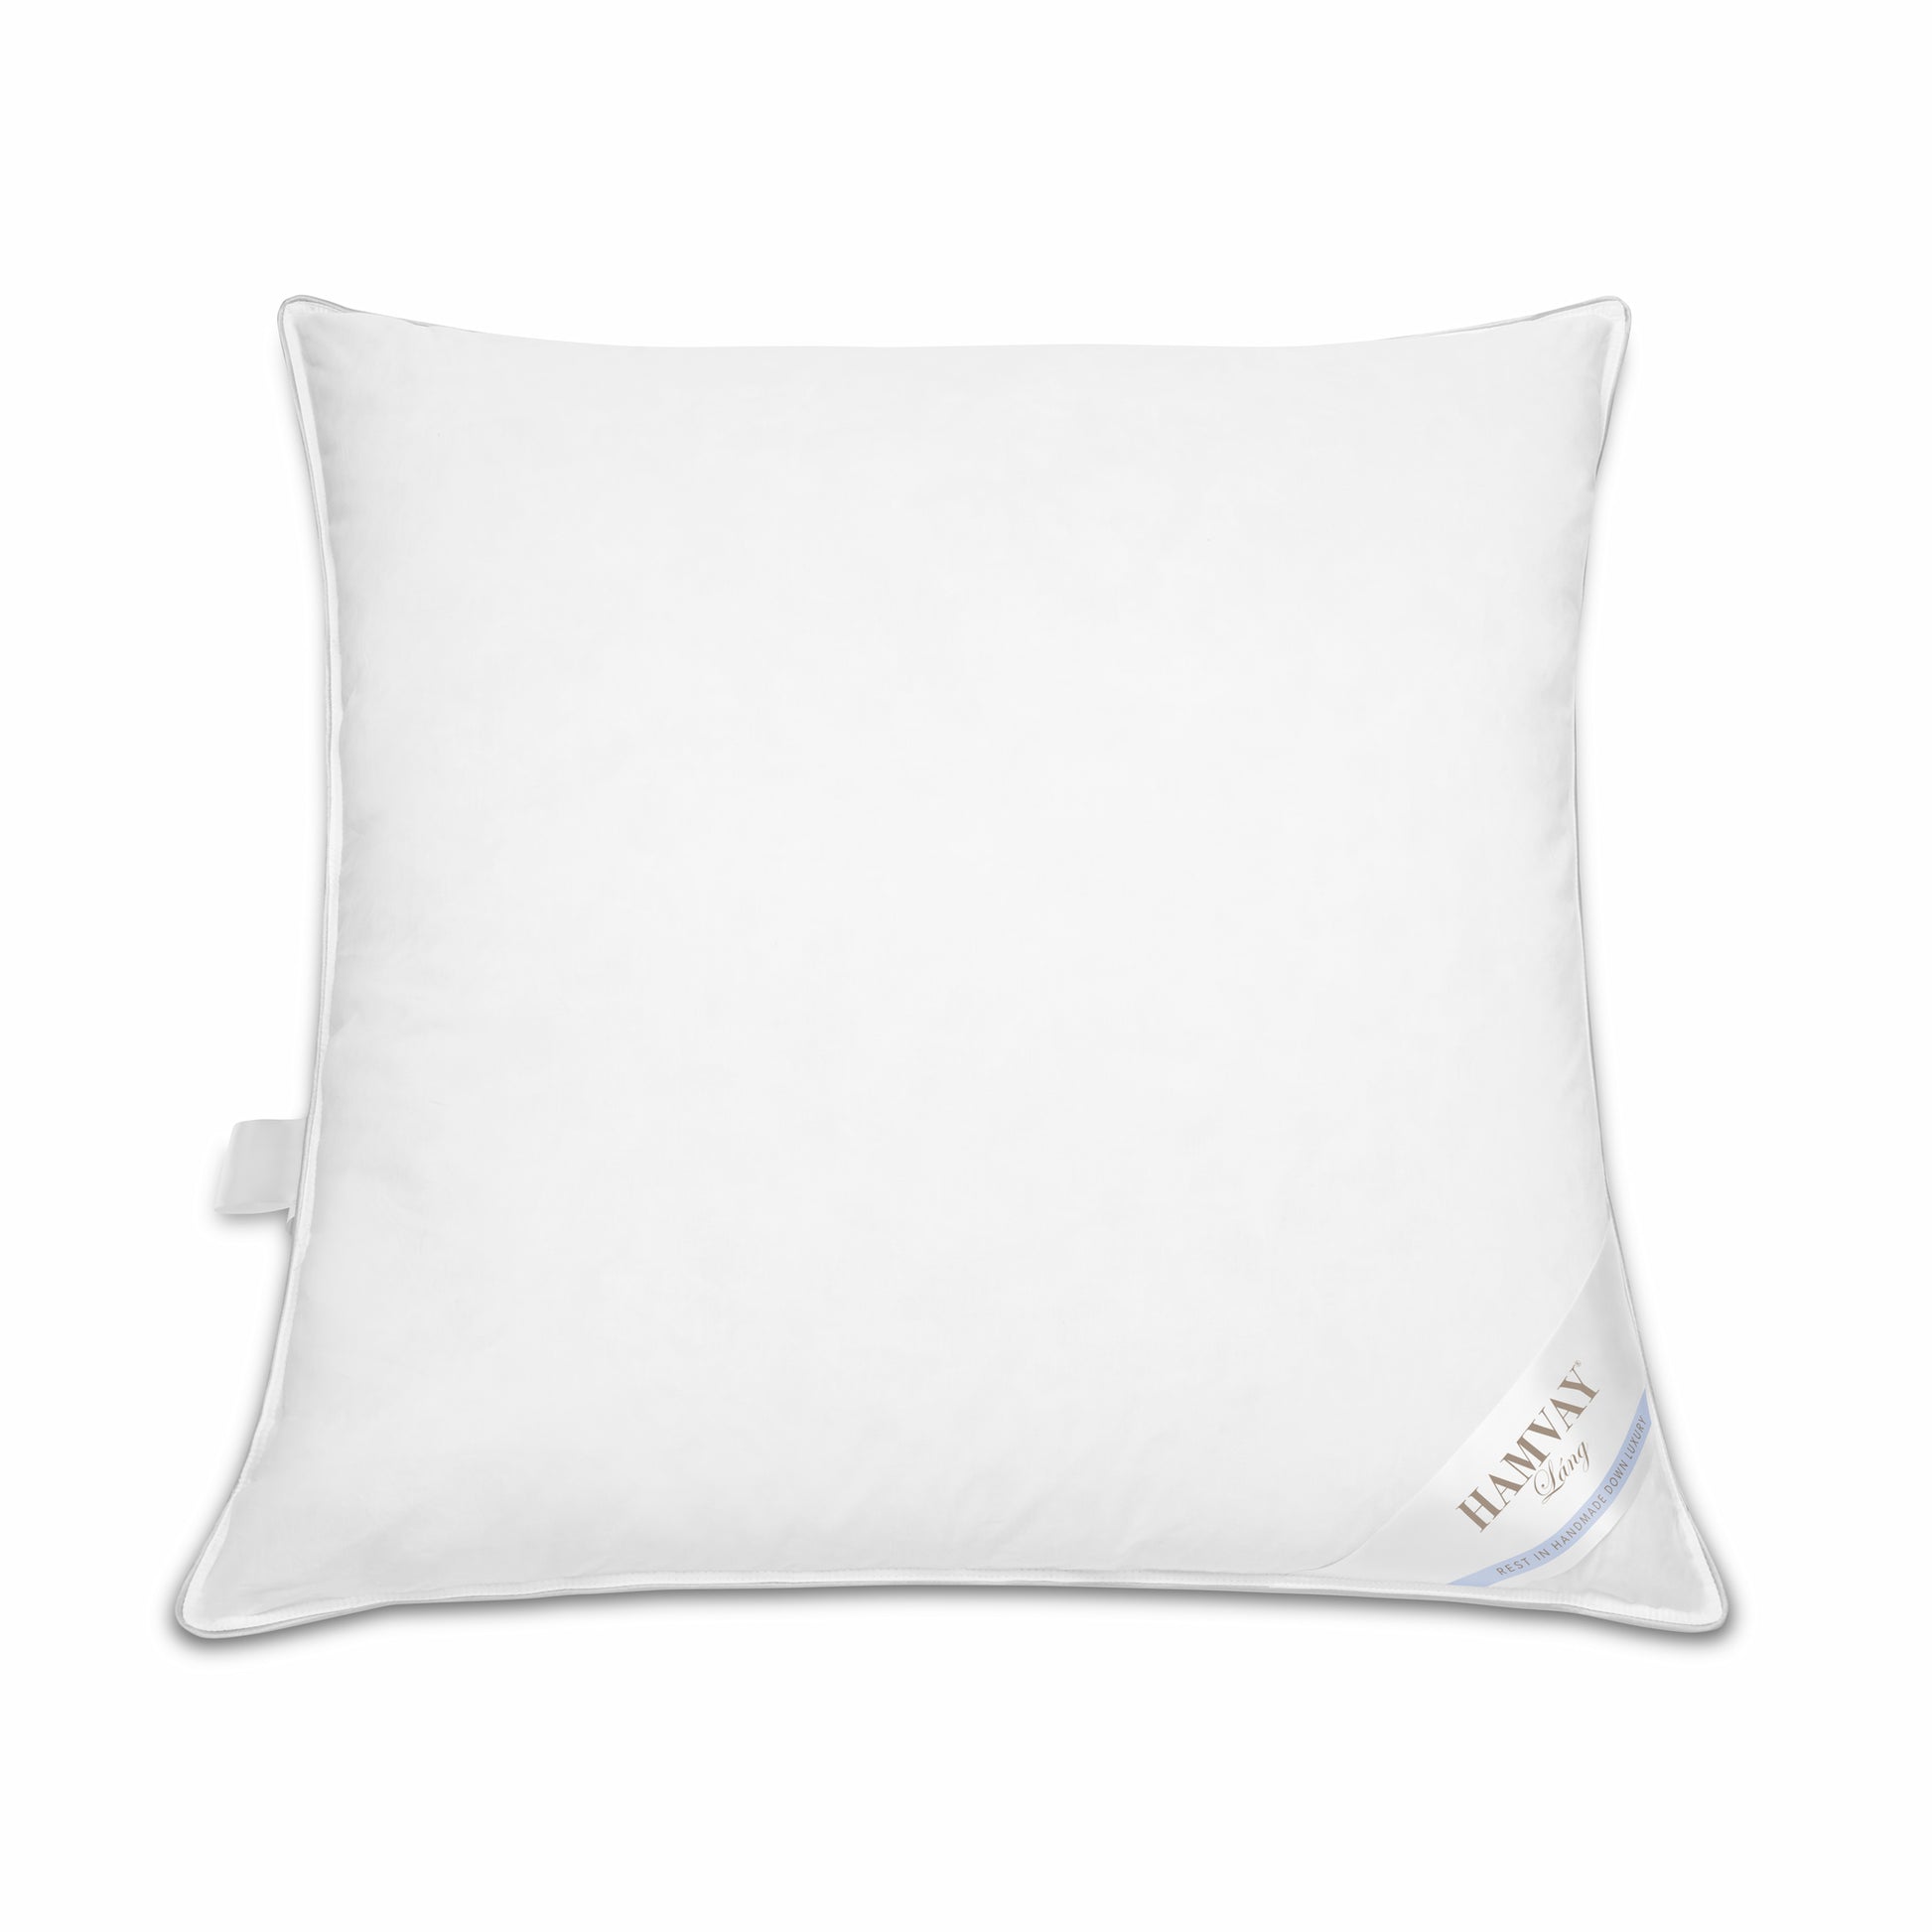  18X18 Decorative Throw Pillow Insert, Down and